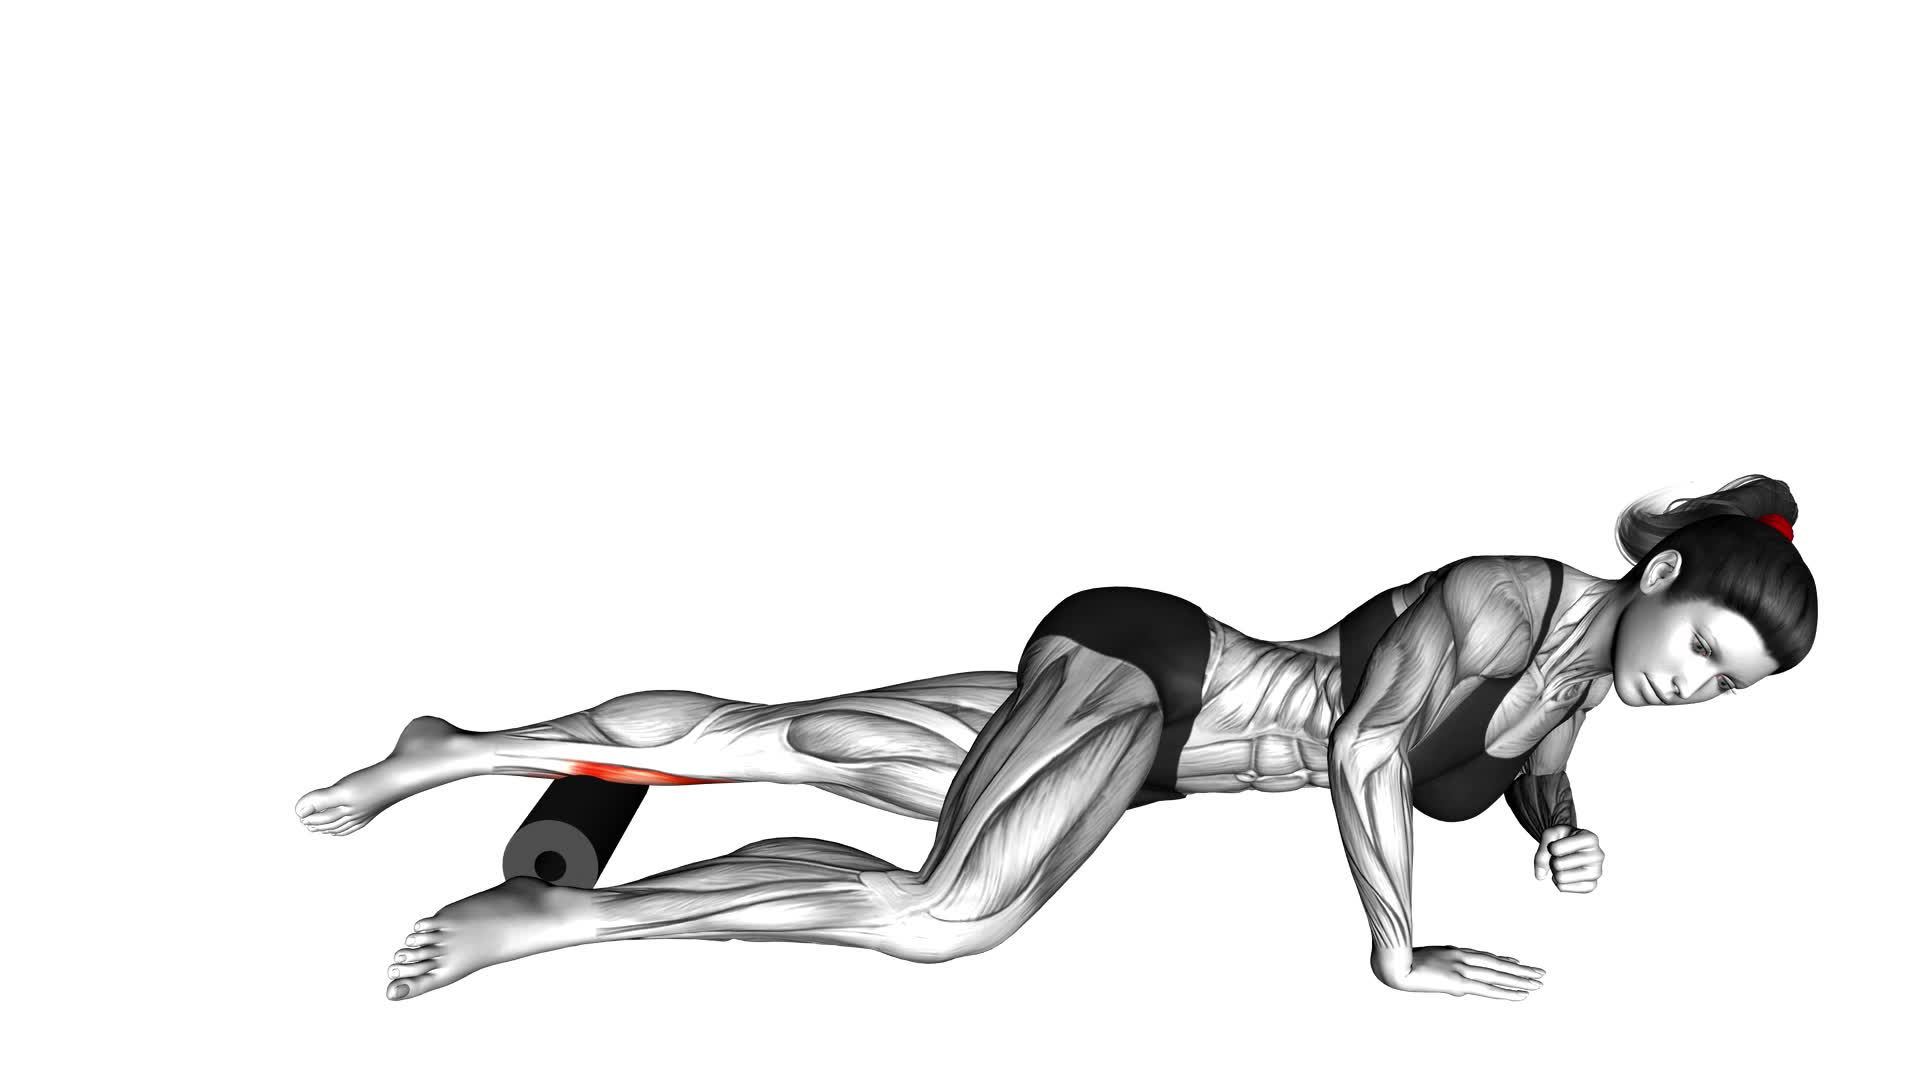 Roll Peroneal (Single Leg) Side Lying on Floor (female) - Video Exercise Guide & Tips